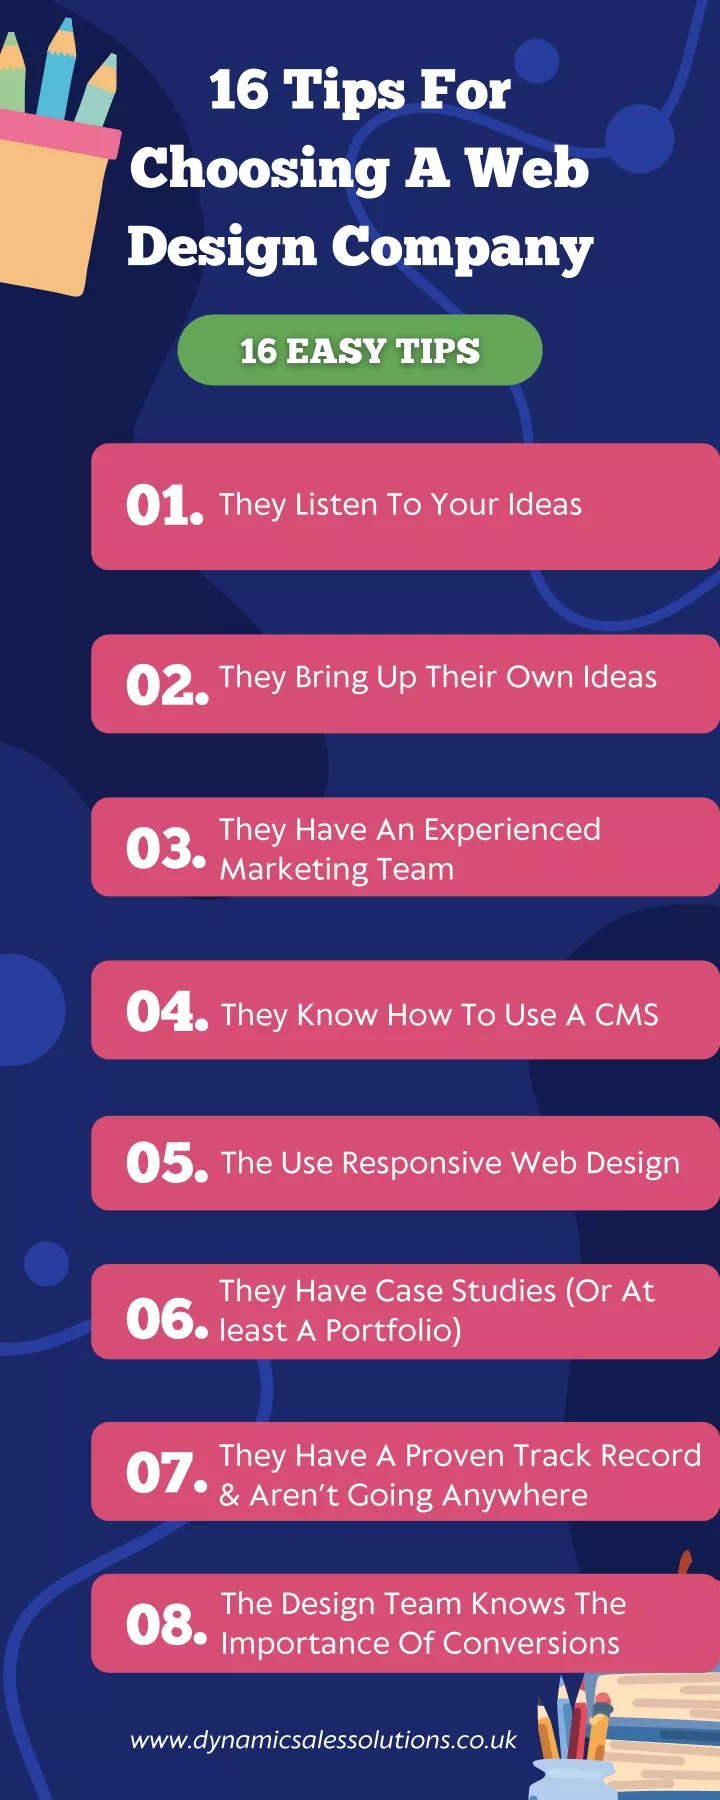 16 tips for choosing a web design company